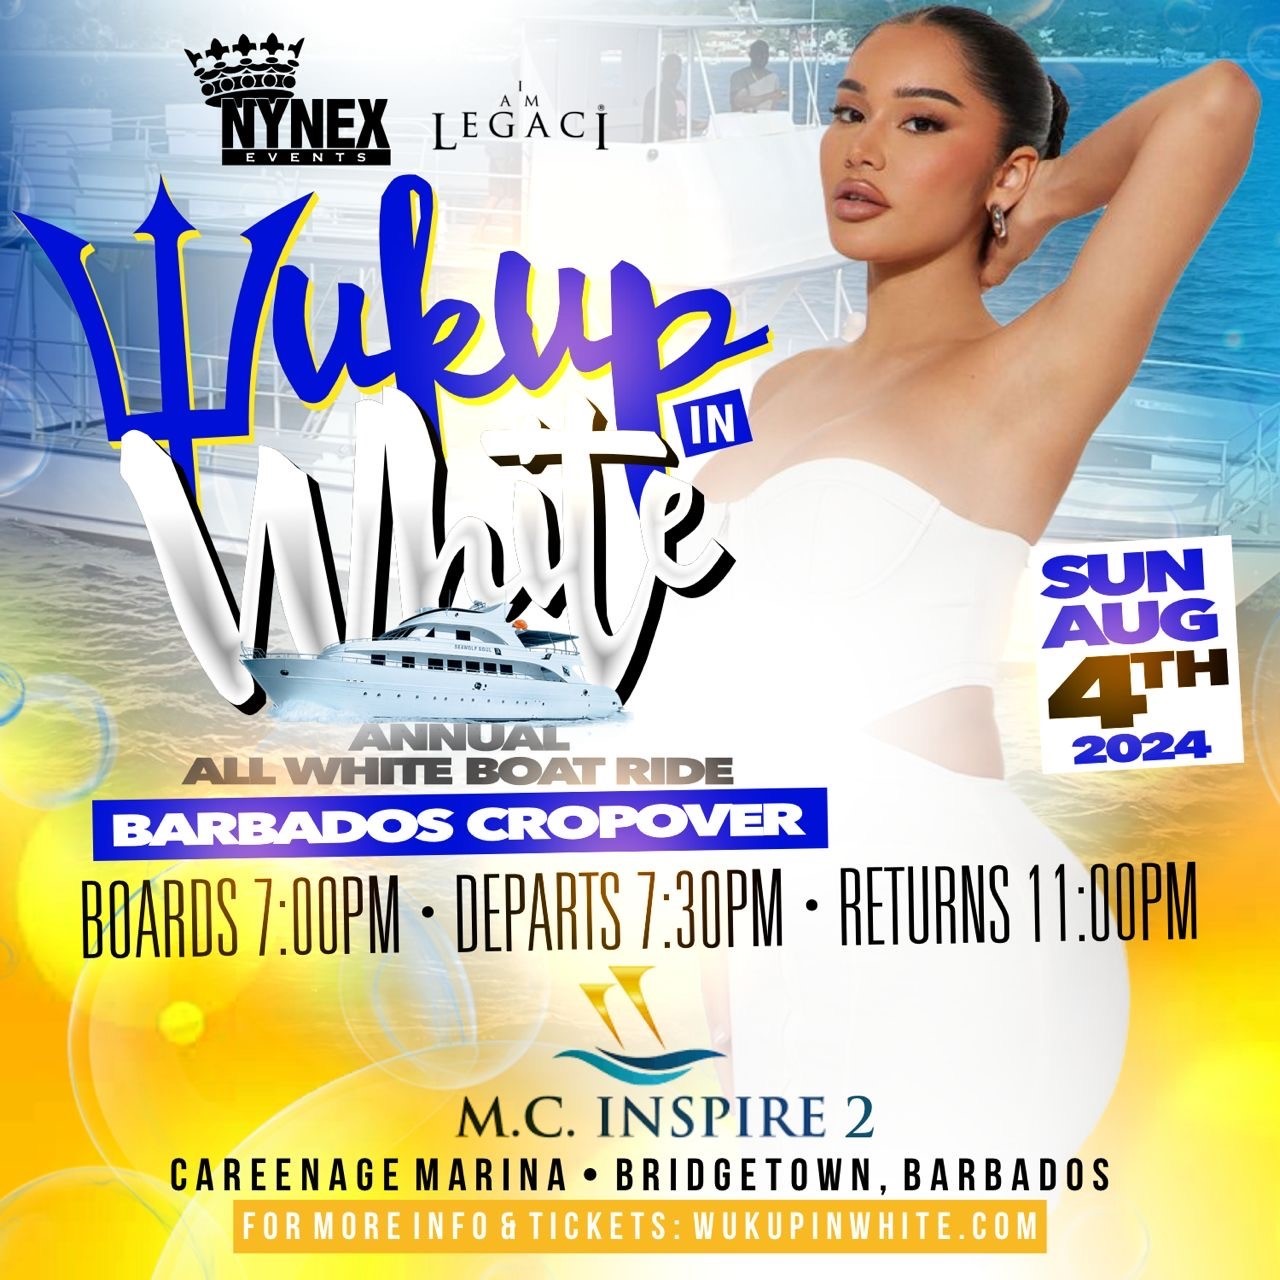 WUK UP IN WHITE The Annual All White Boat Ride · Barbados Crop Over 2024 WUK UP IN WHITE The Annual All White Boat Ride · Barbados Crop Over 2024 on Aug 04, 19:00@M.C. Inspire 2 - Buy tickets and Get information on www.fetefinders.com tickets.fetefinders.com